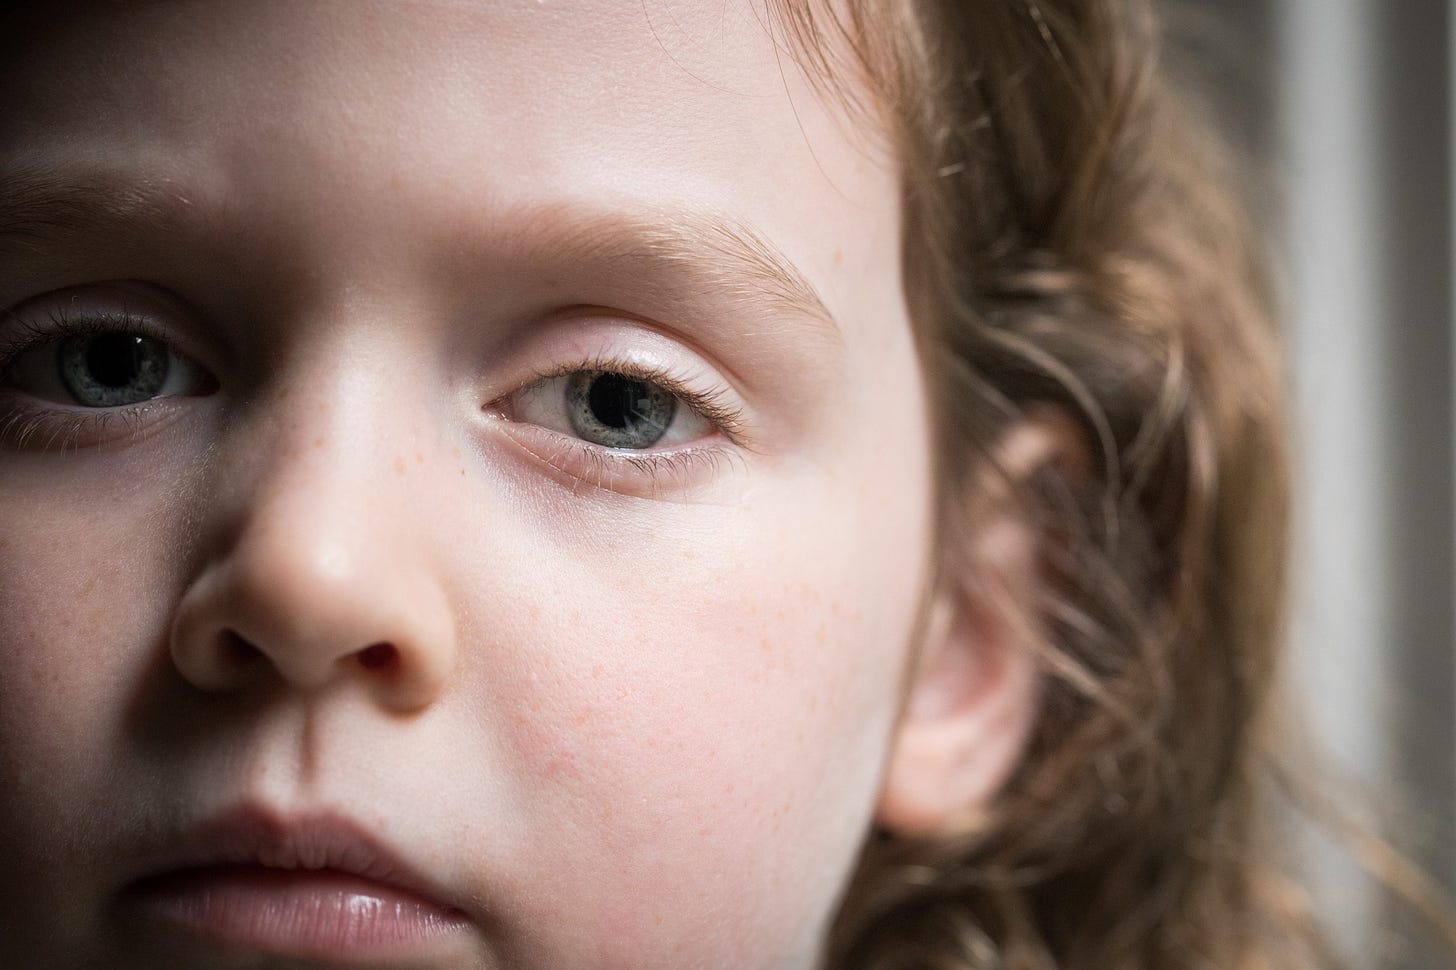 A young child with curly red hair stares sadly at the camera in a close up.